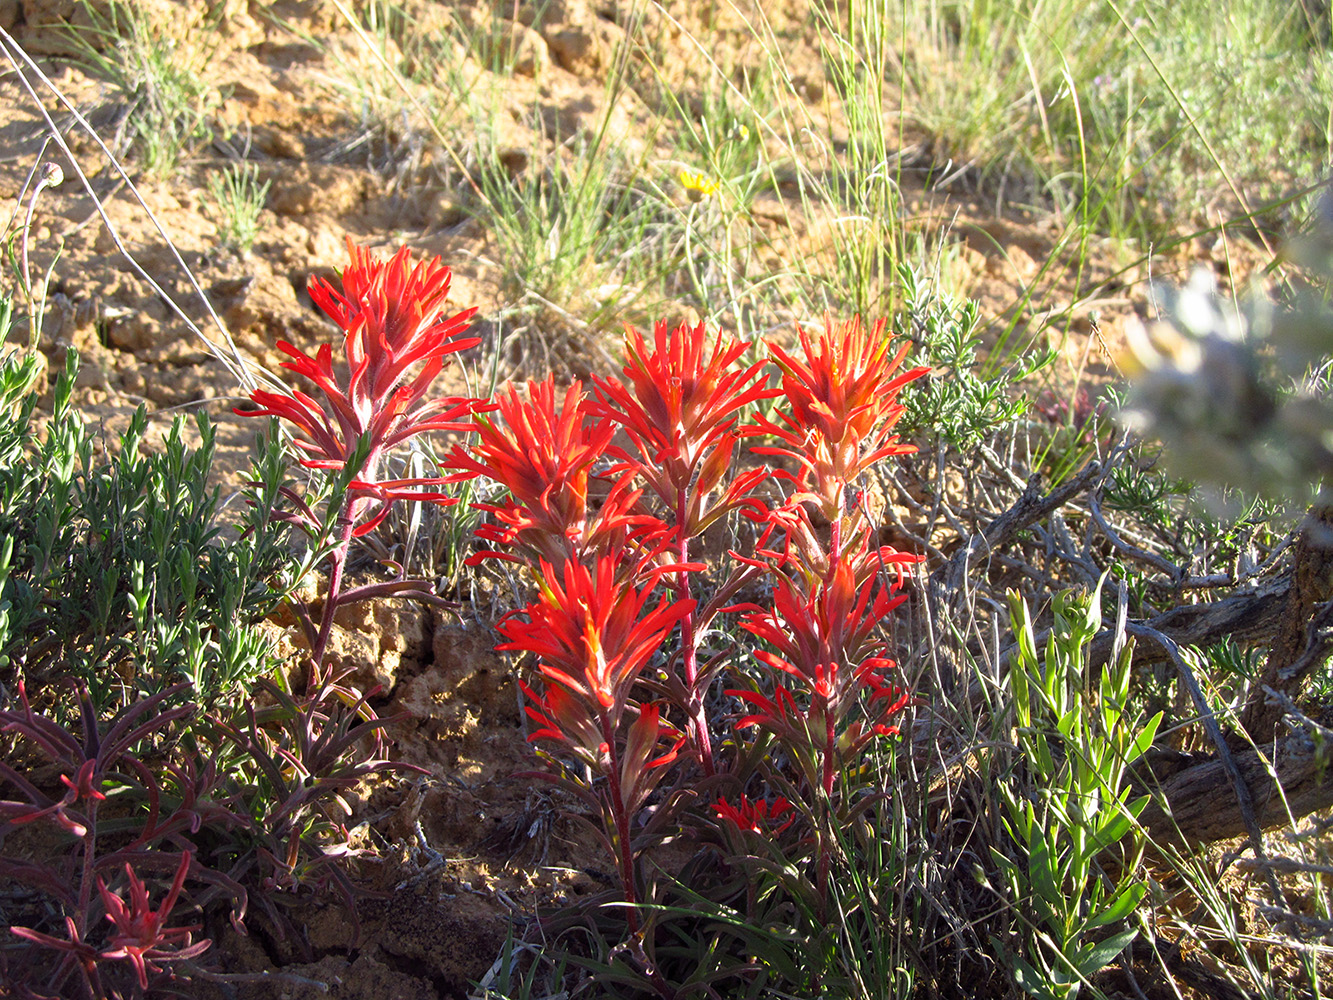 Bright orange red mass of bracts (modified leaves) at the top of a plant with red/purple leaves below them and green foliage behind and in front of them.